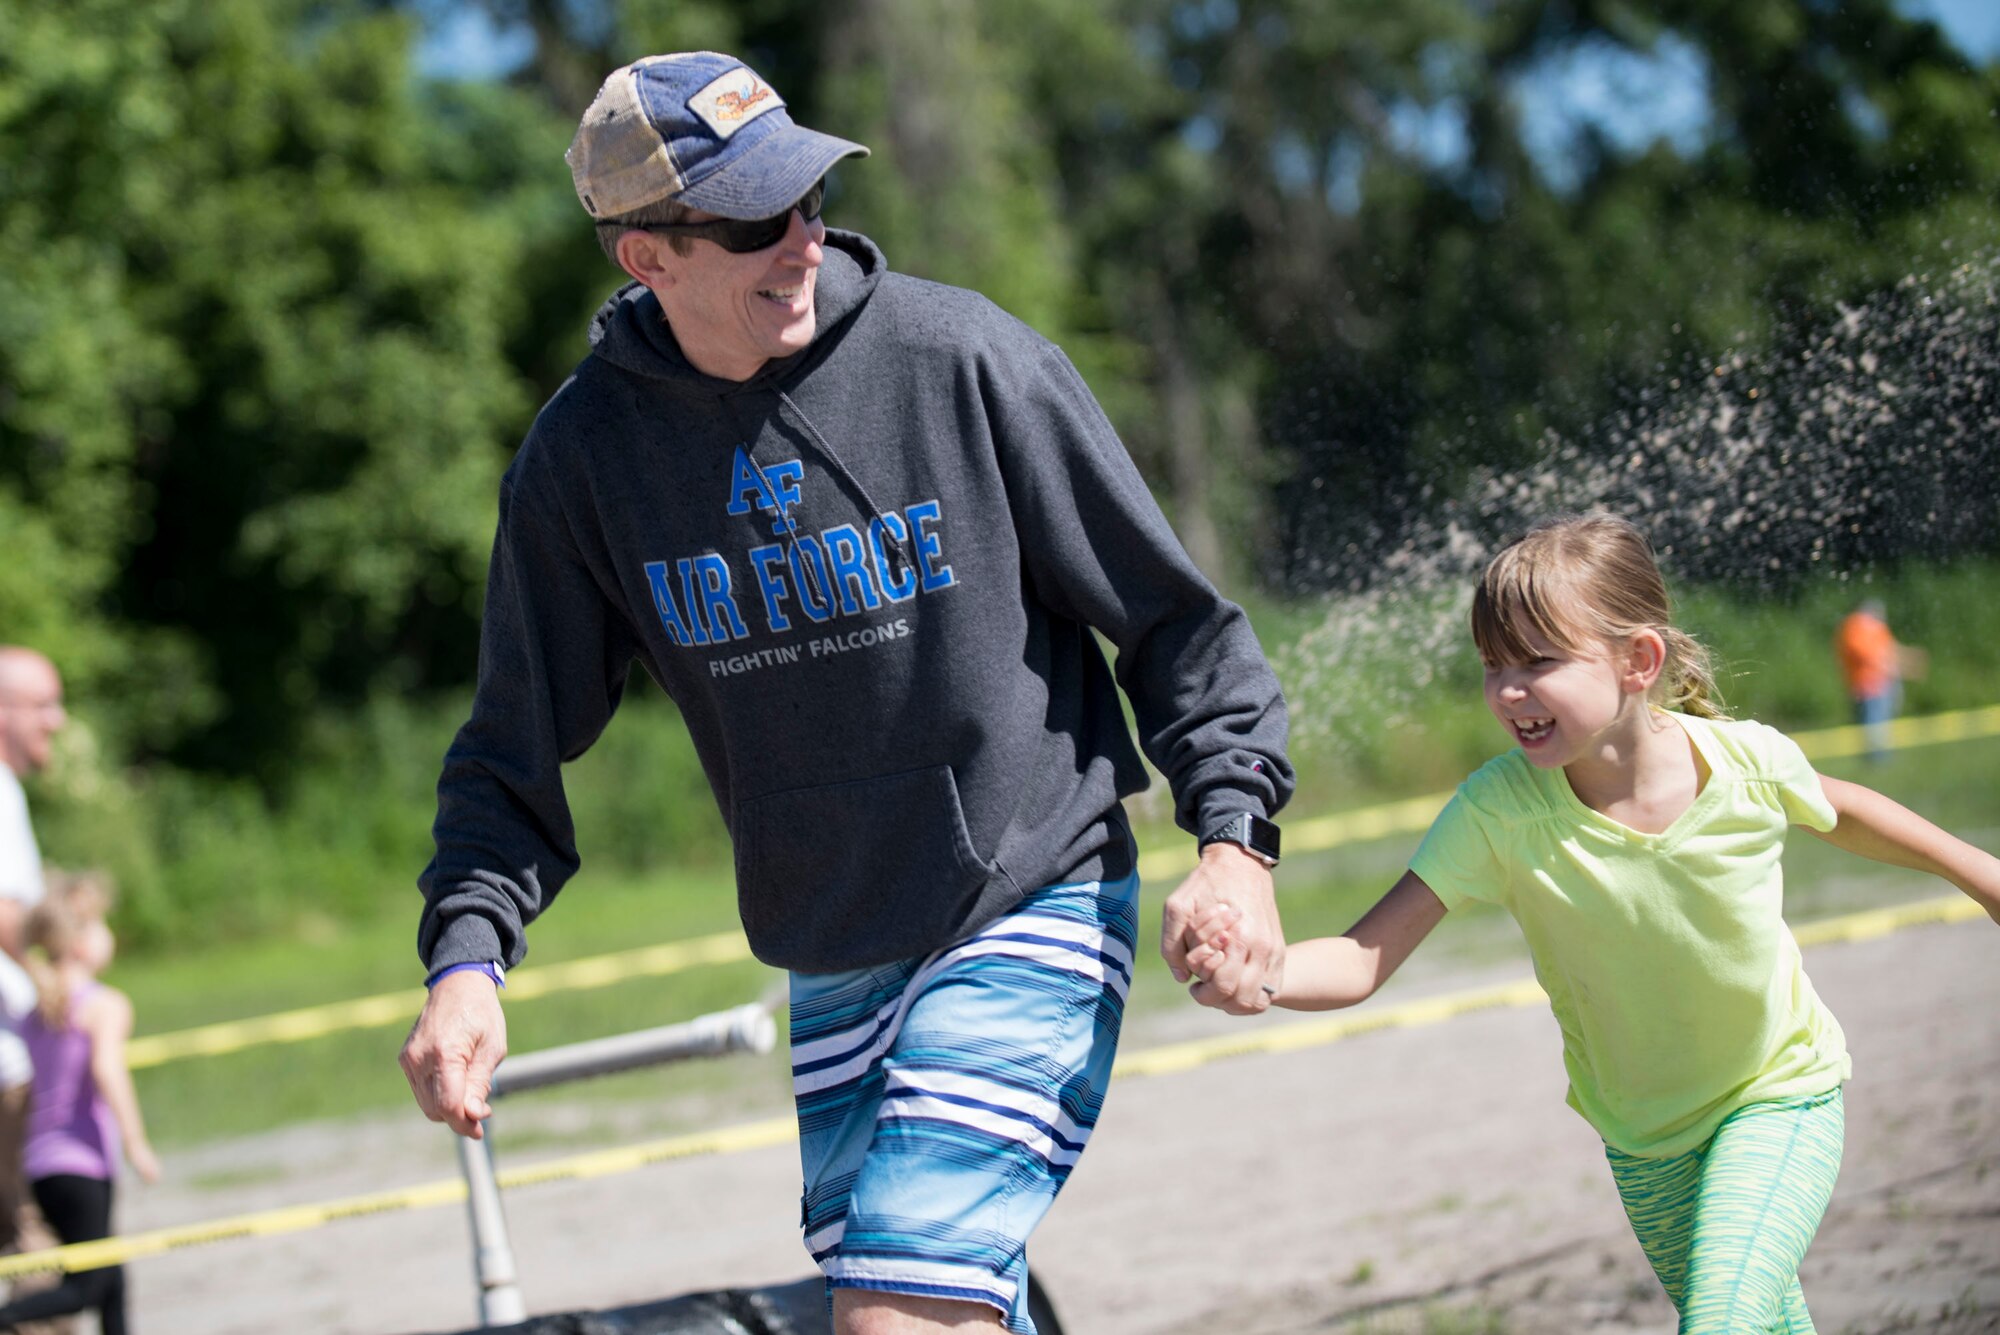 Col. Thomas Kunkel, 23d Wing commander, and his daughter, Avery, run through sprinklers during the annual Moody Mud Run, May 6, 2017, in Ray City, Ga. The Fourth Annual Moody Mud consisted of both adult and child course that challenged more than 600 participants with obstacles over 4.2 miles. (U.S. Air Force photo by Airman 1st Class Daniel Snider)